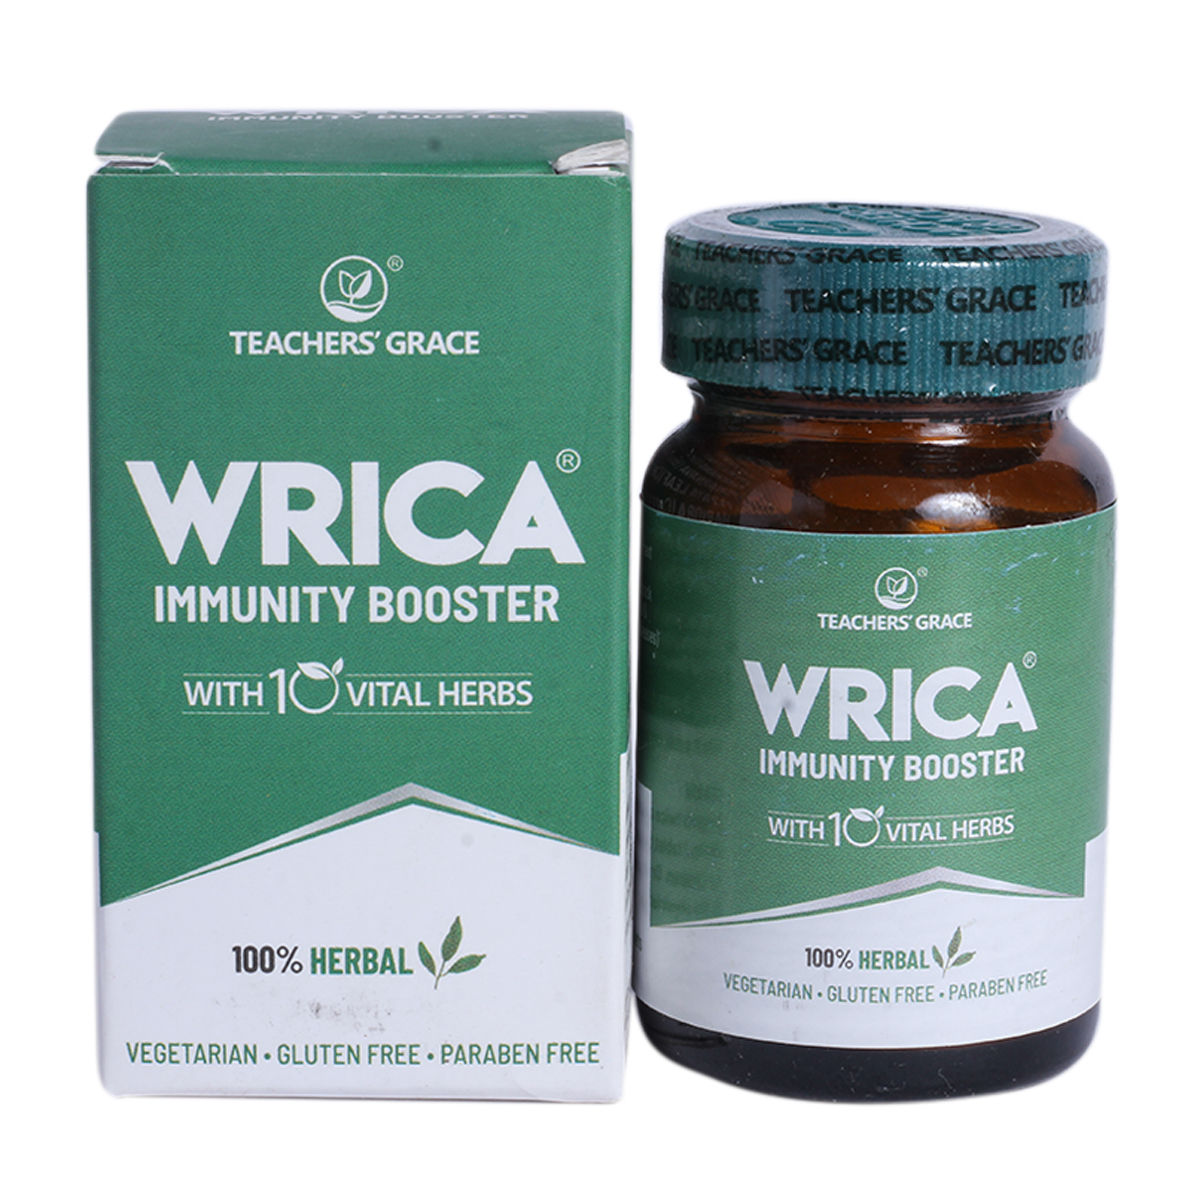 Teachers' Grace Wrica Immunity Booster, 60 Tablets, Pack of 1 